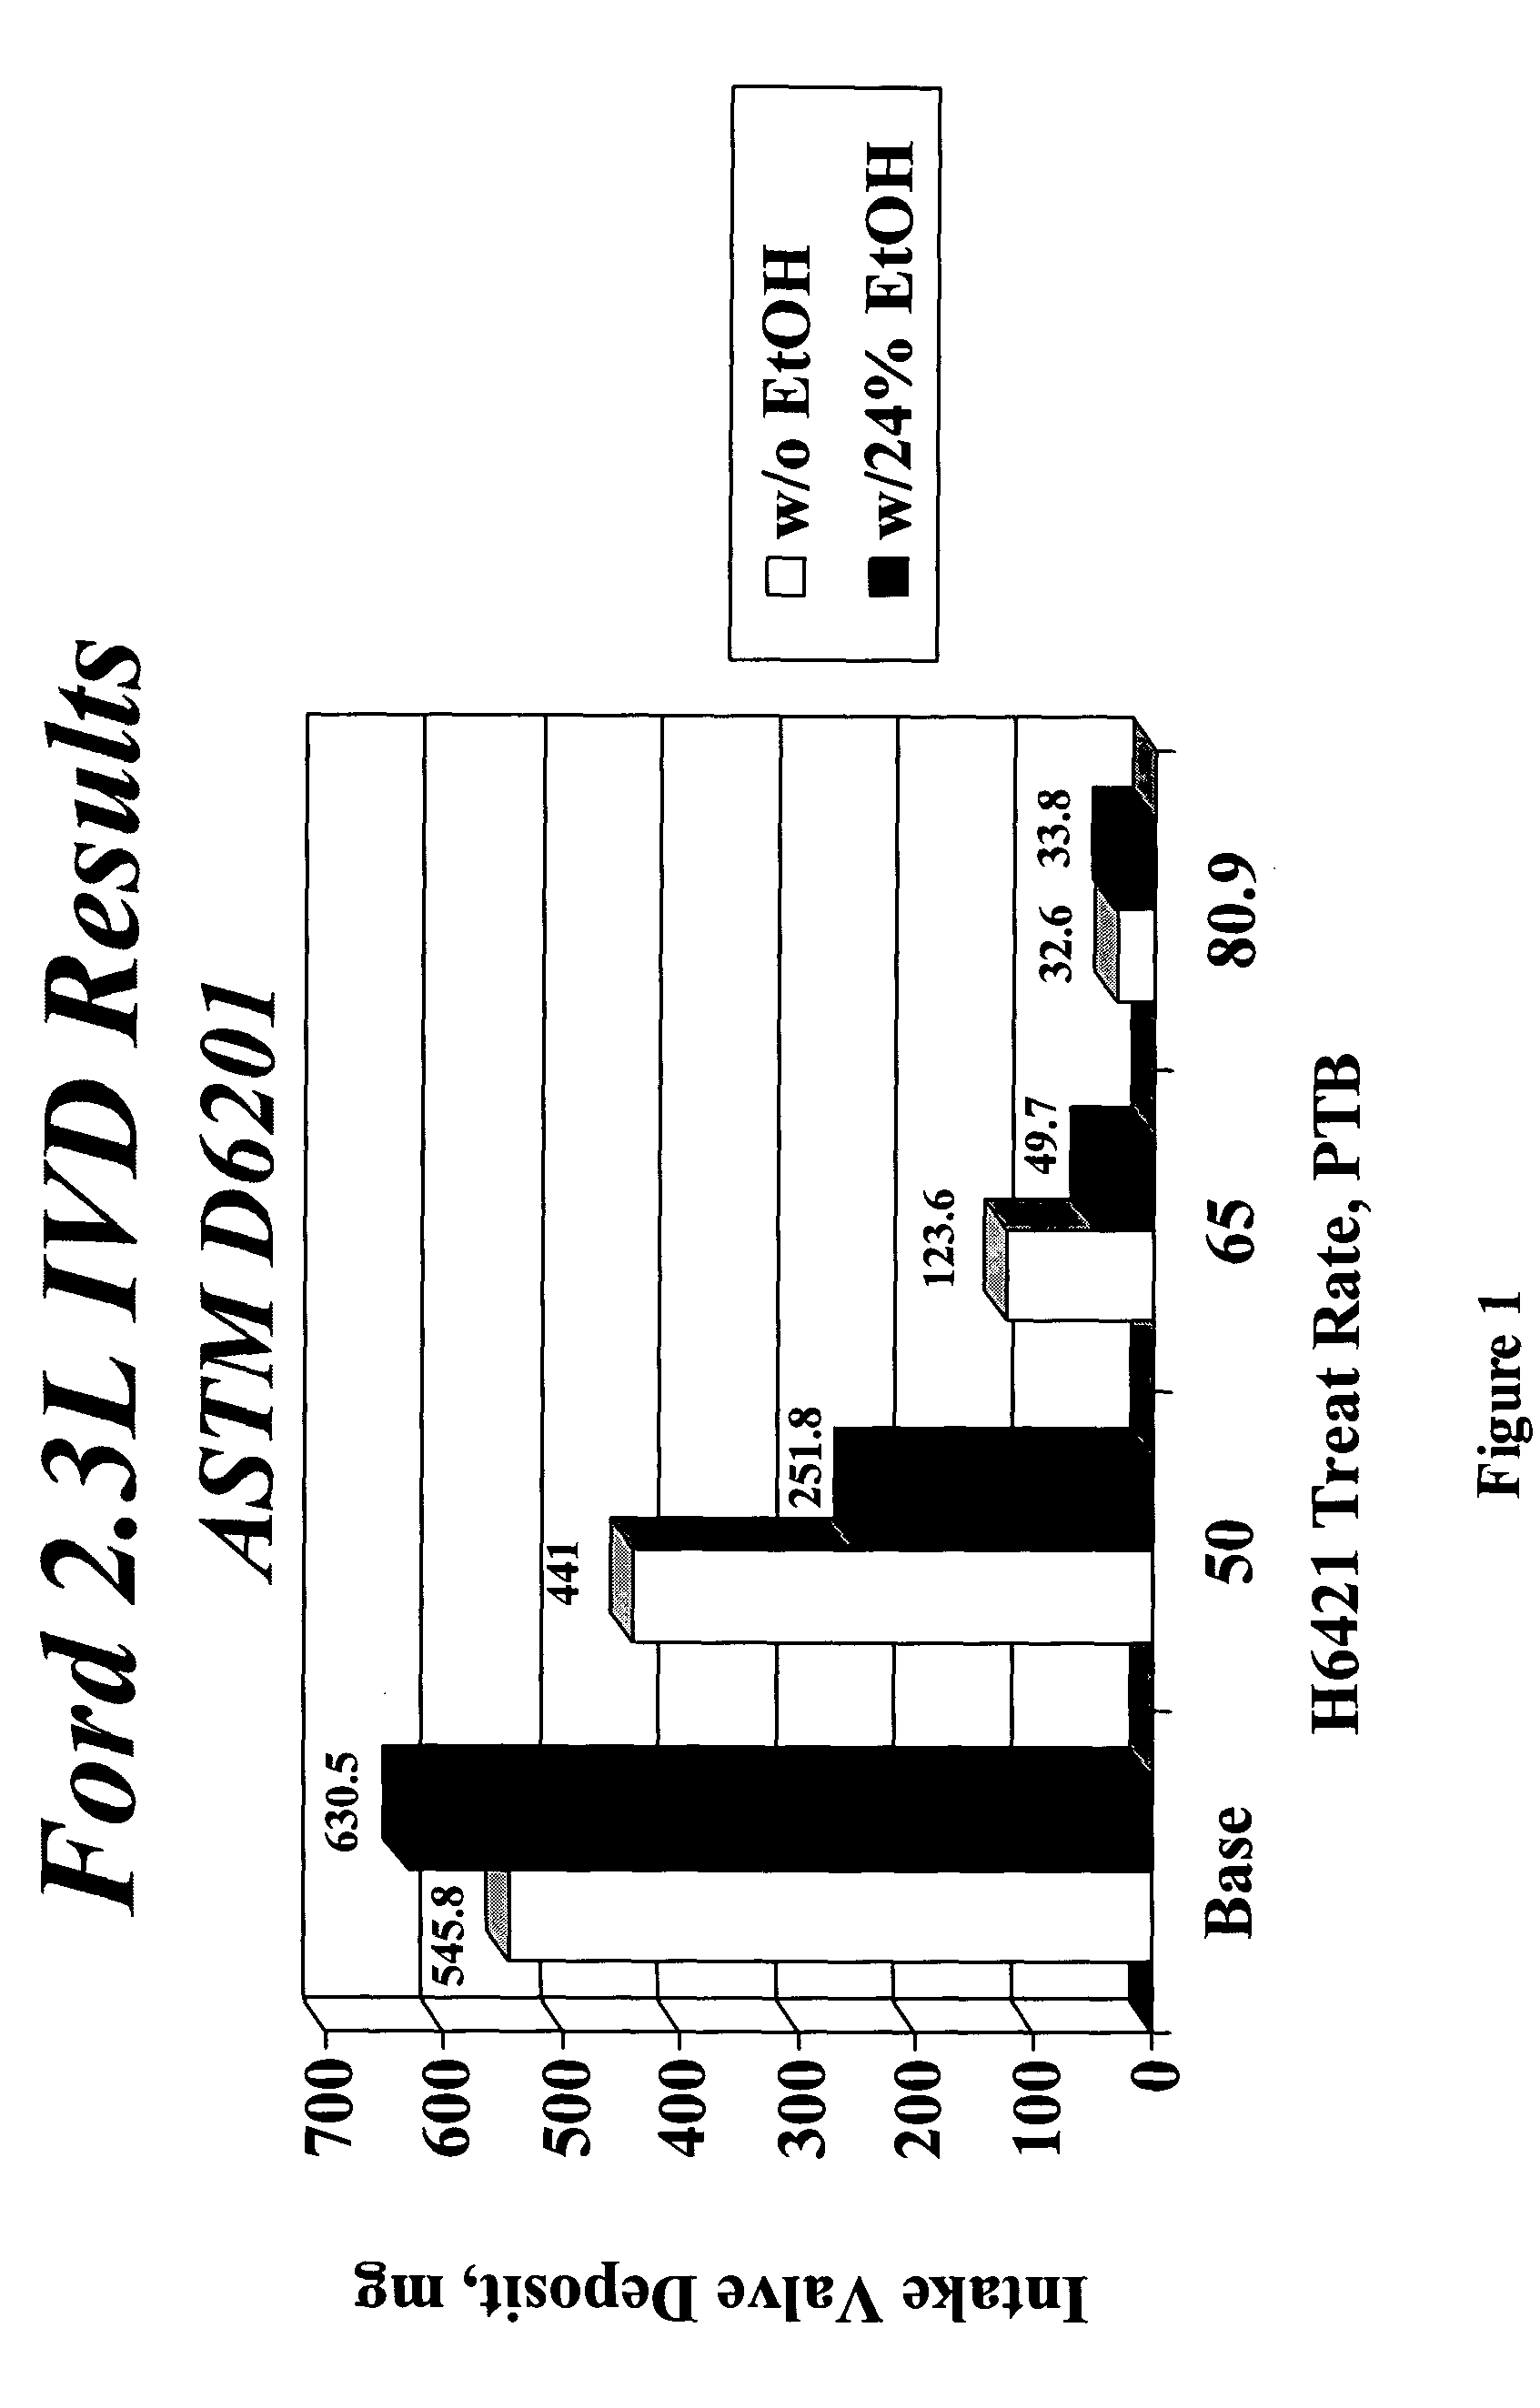 Use of detergent additives in high-ethanol fuels for deposit control